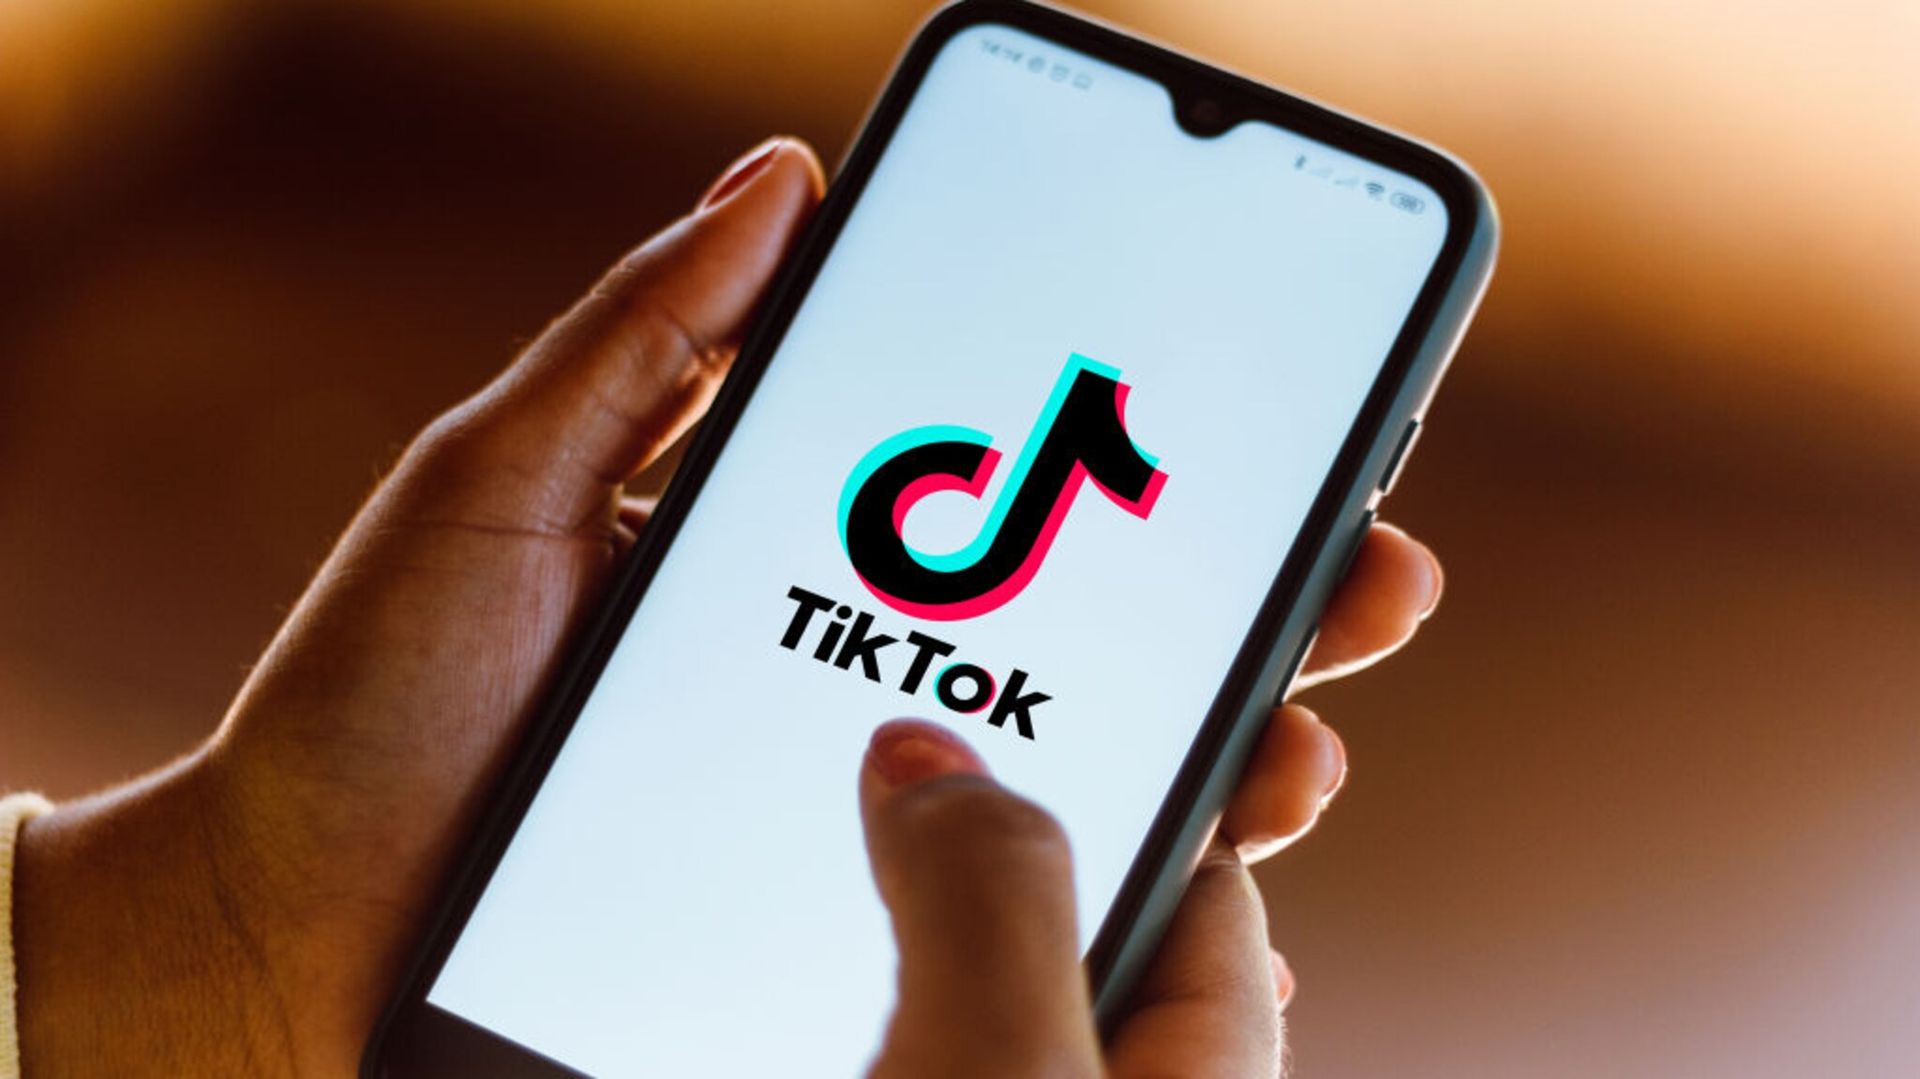 Many people are wondering what happened to Archie Battersbee as the 12-year-old has been in a coma since April because of the TikTok blackout challenge.